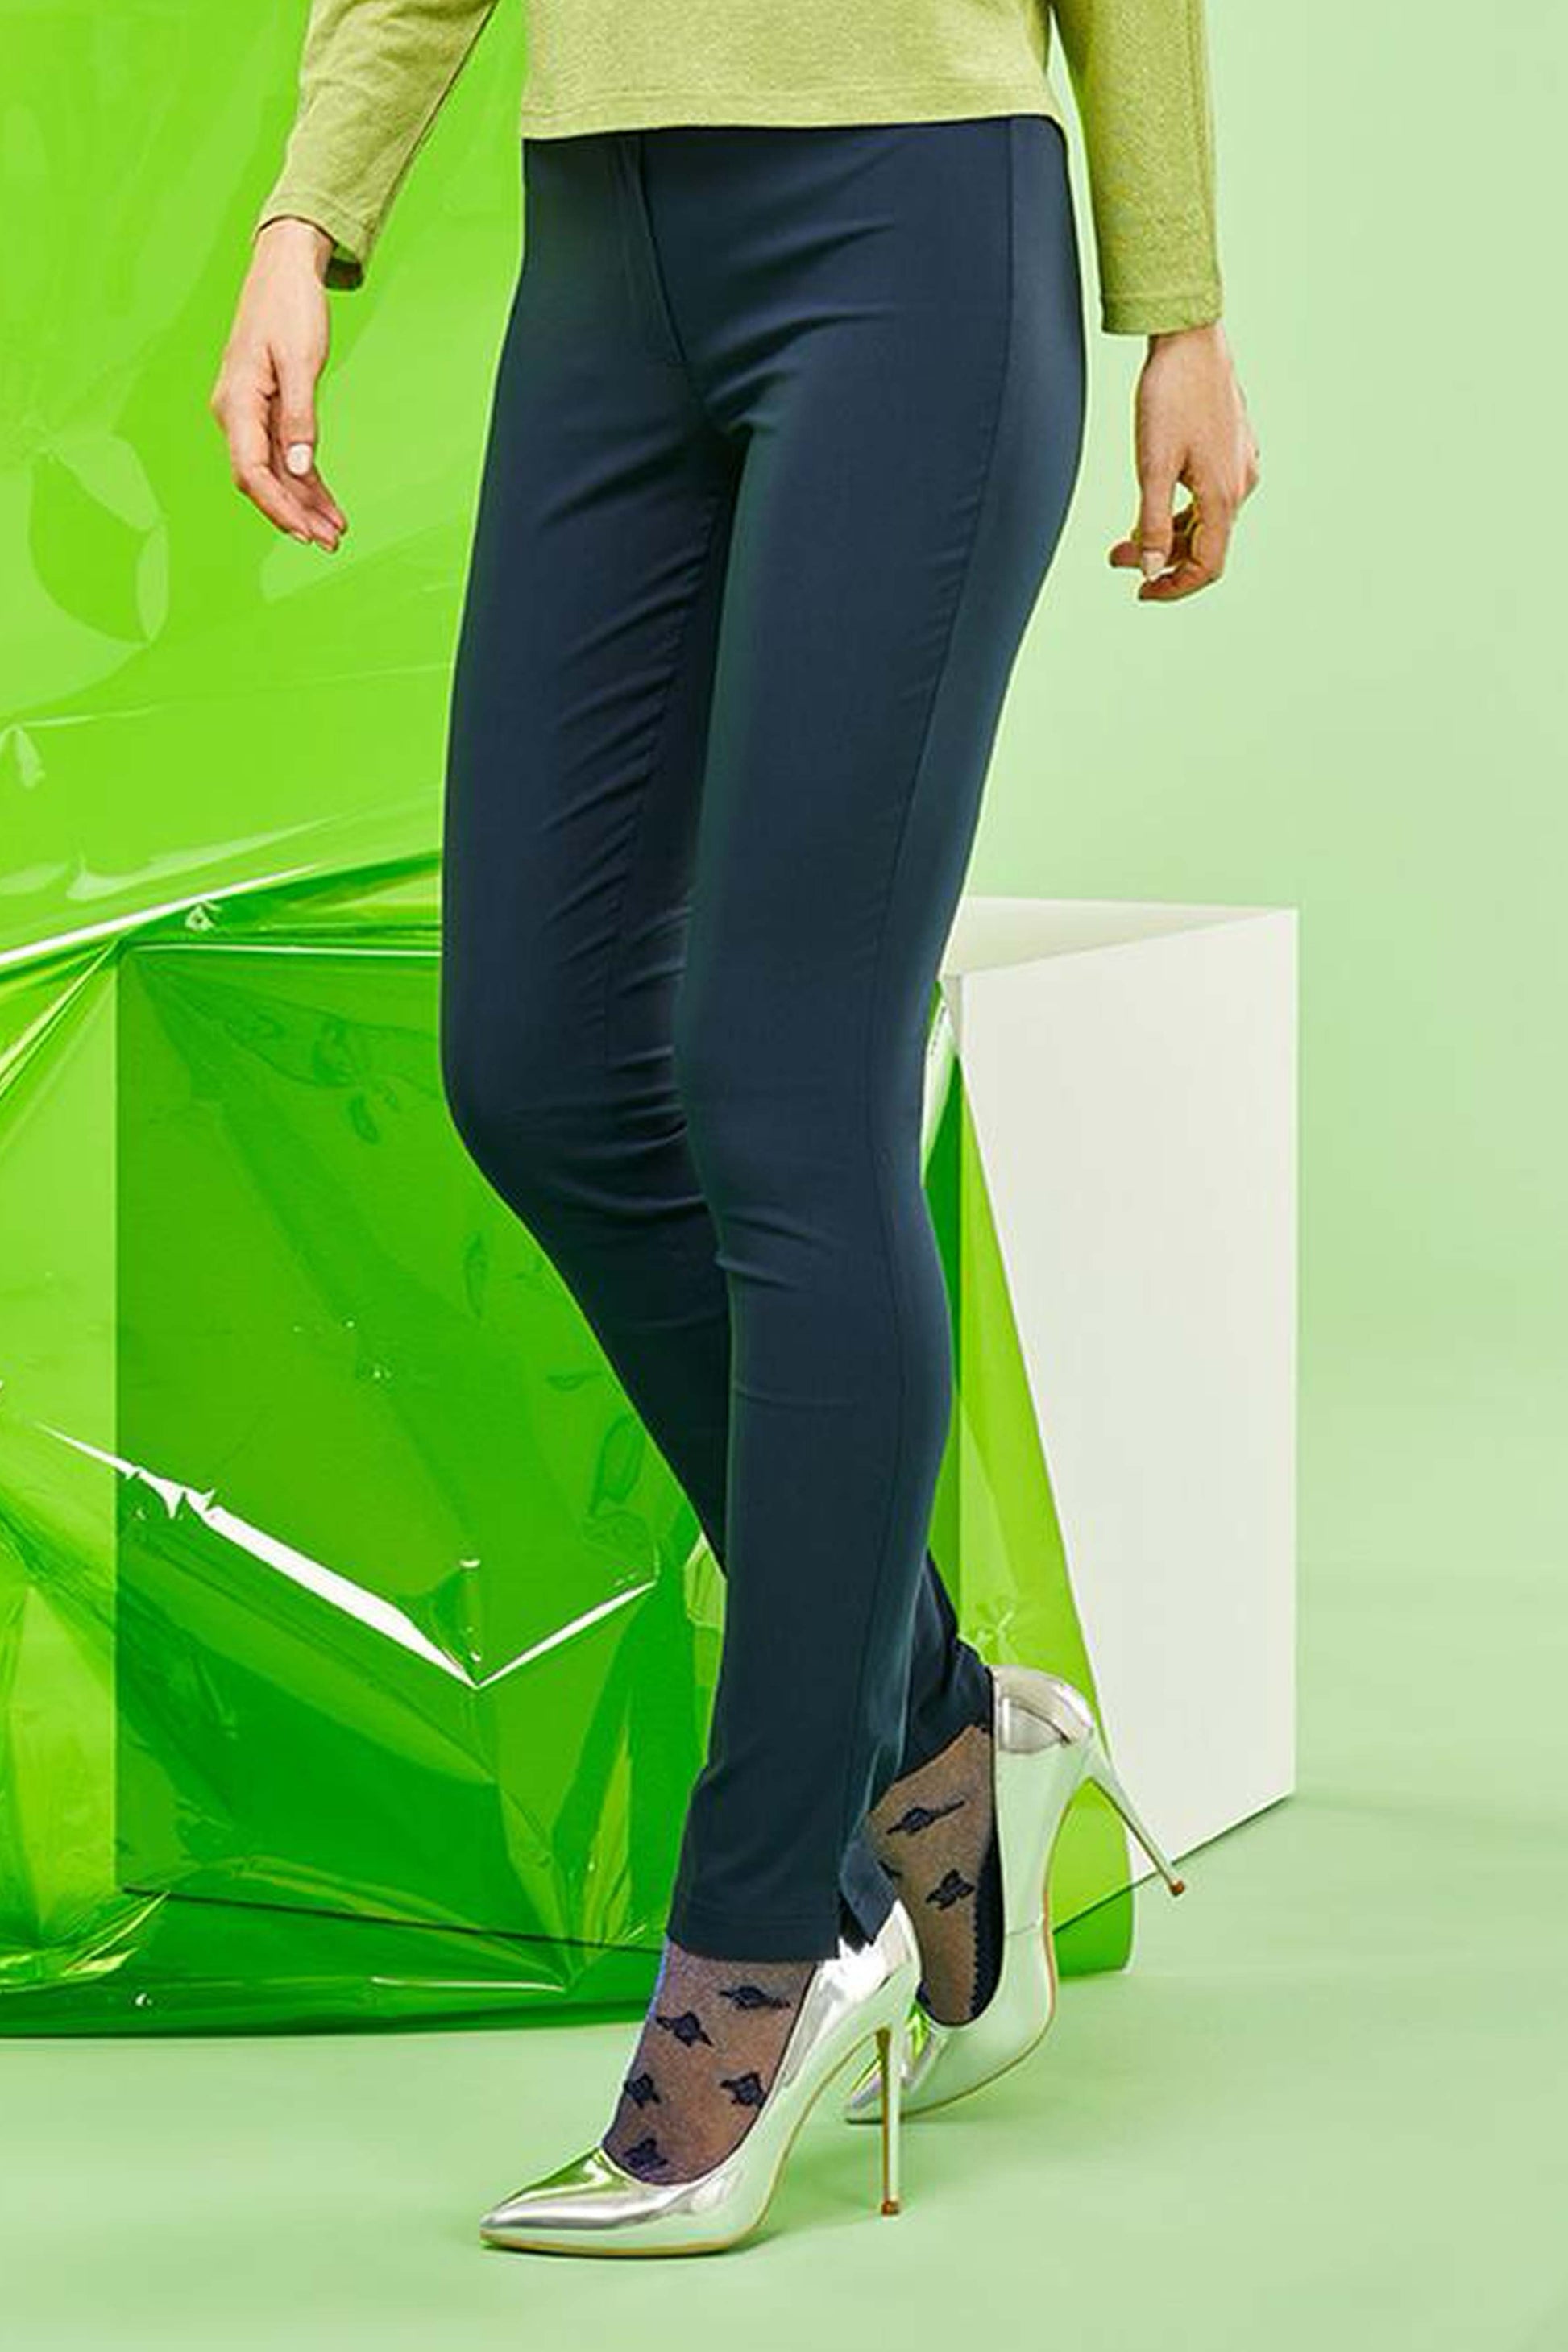 SiSi Belt Treggings - Navy blue light weight high waisted stretch viscose trouser leggings (treggings), worn with a lime green top, sparkly socks and silver stiletto heels.